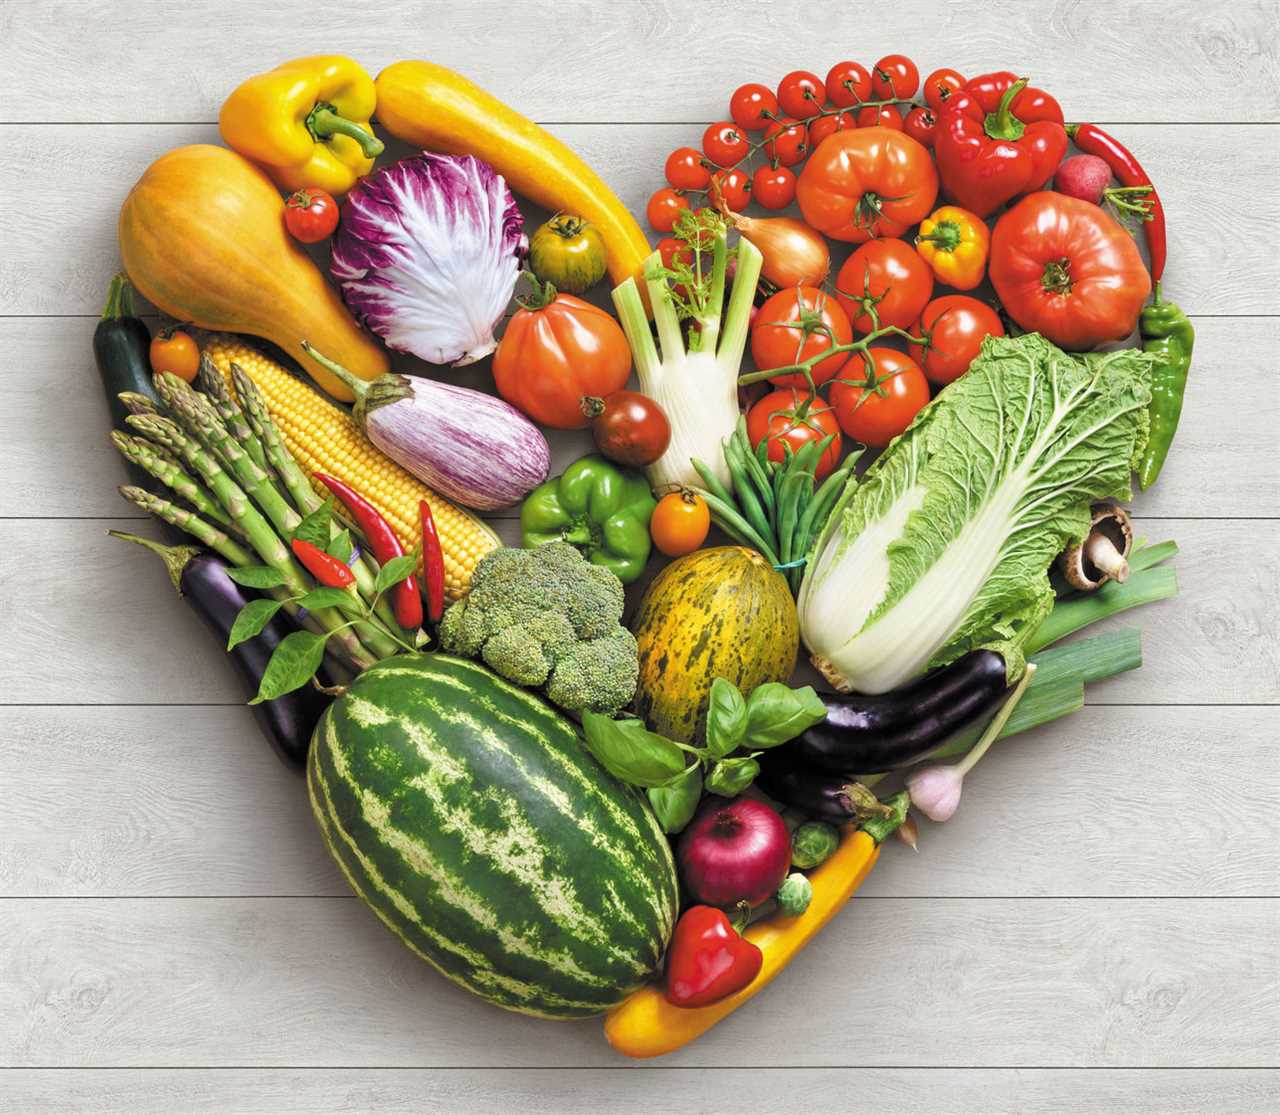 Heart Healthy Tips: A Plant Based Diet